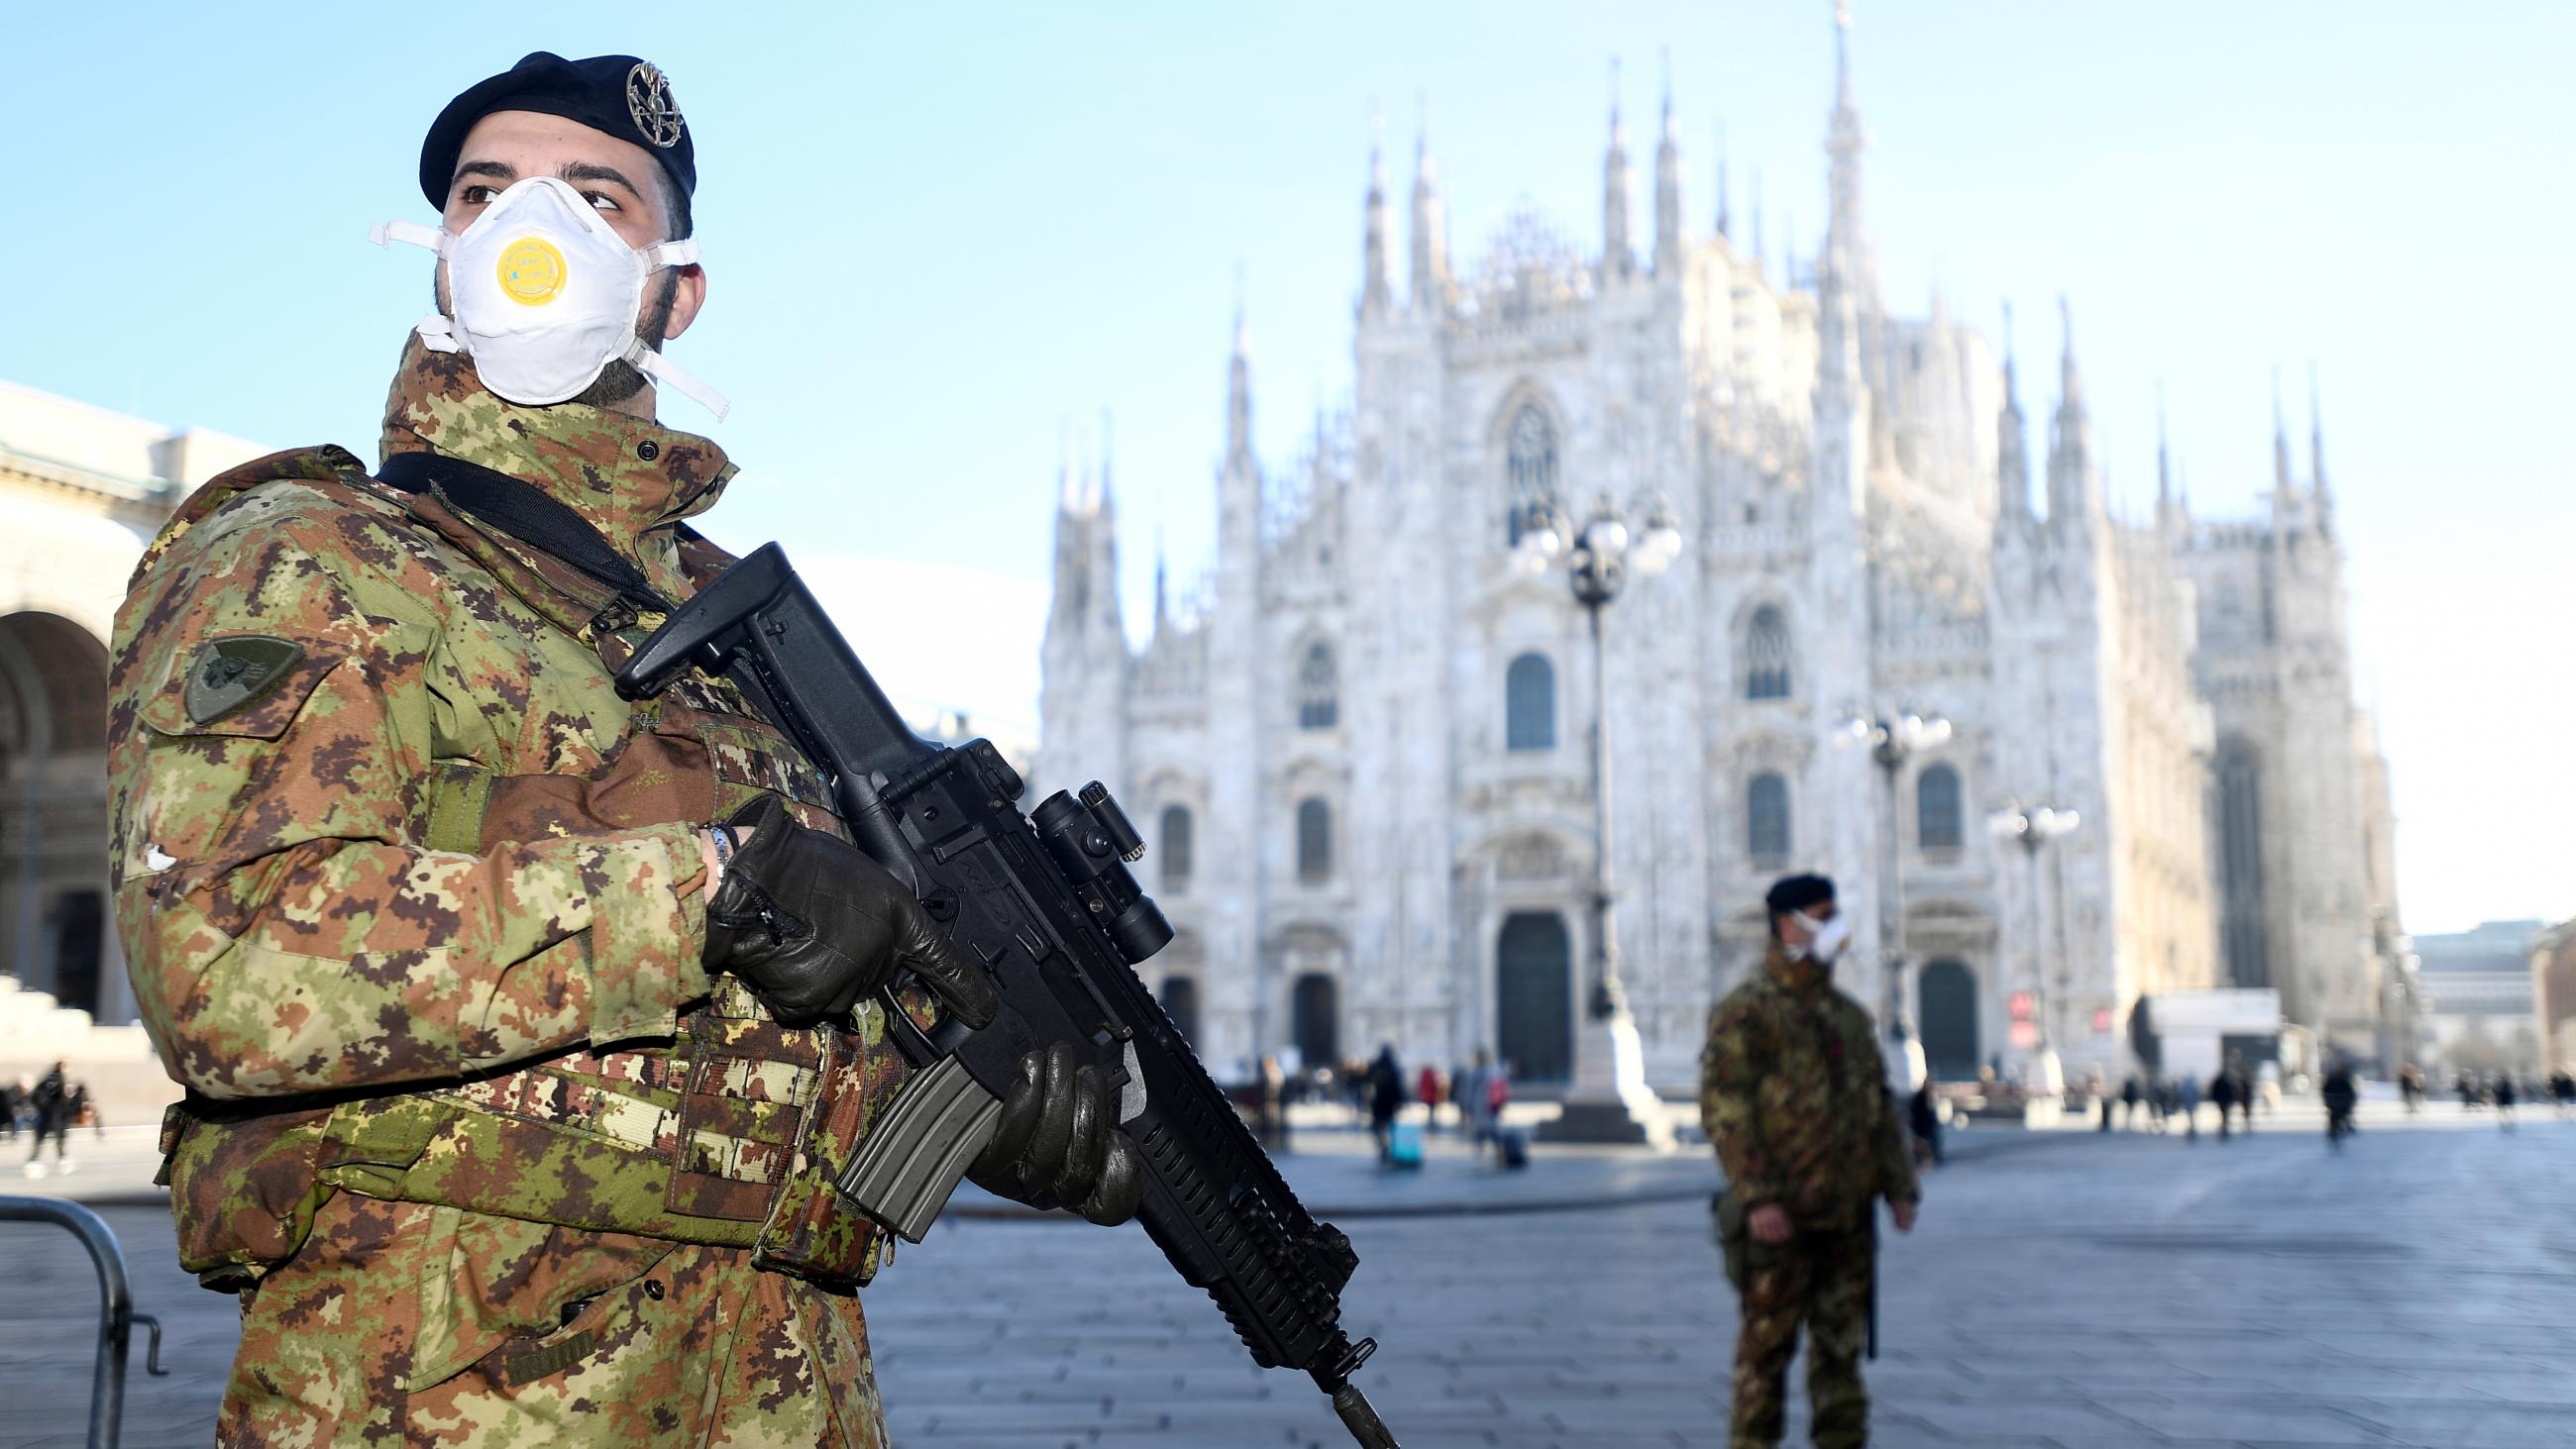 Italian military officers wearing face masks stand outside Duomo cathedral, closed by authorities due to the COVID-19 outbreak.